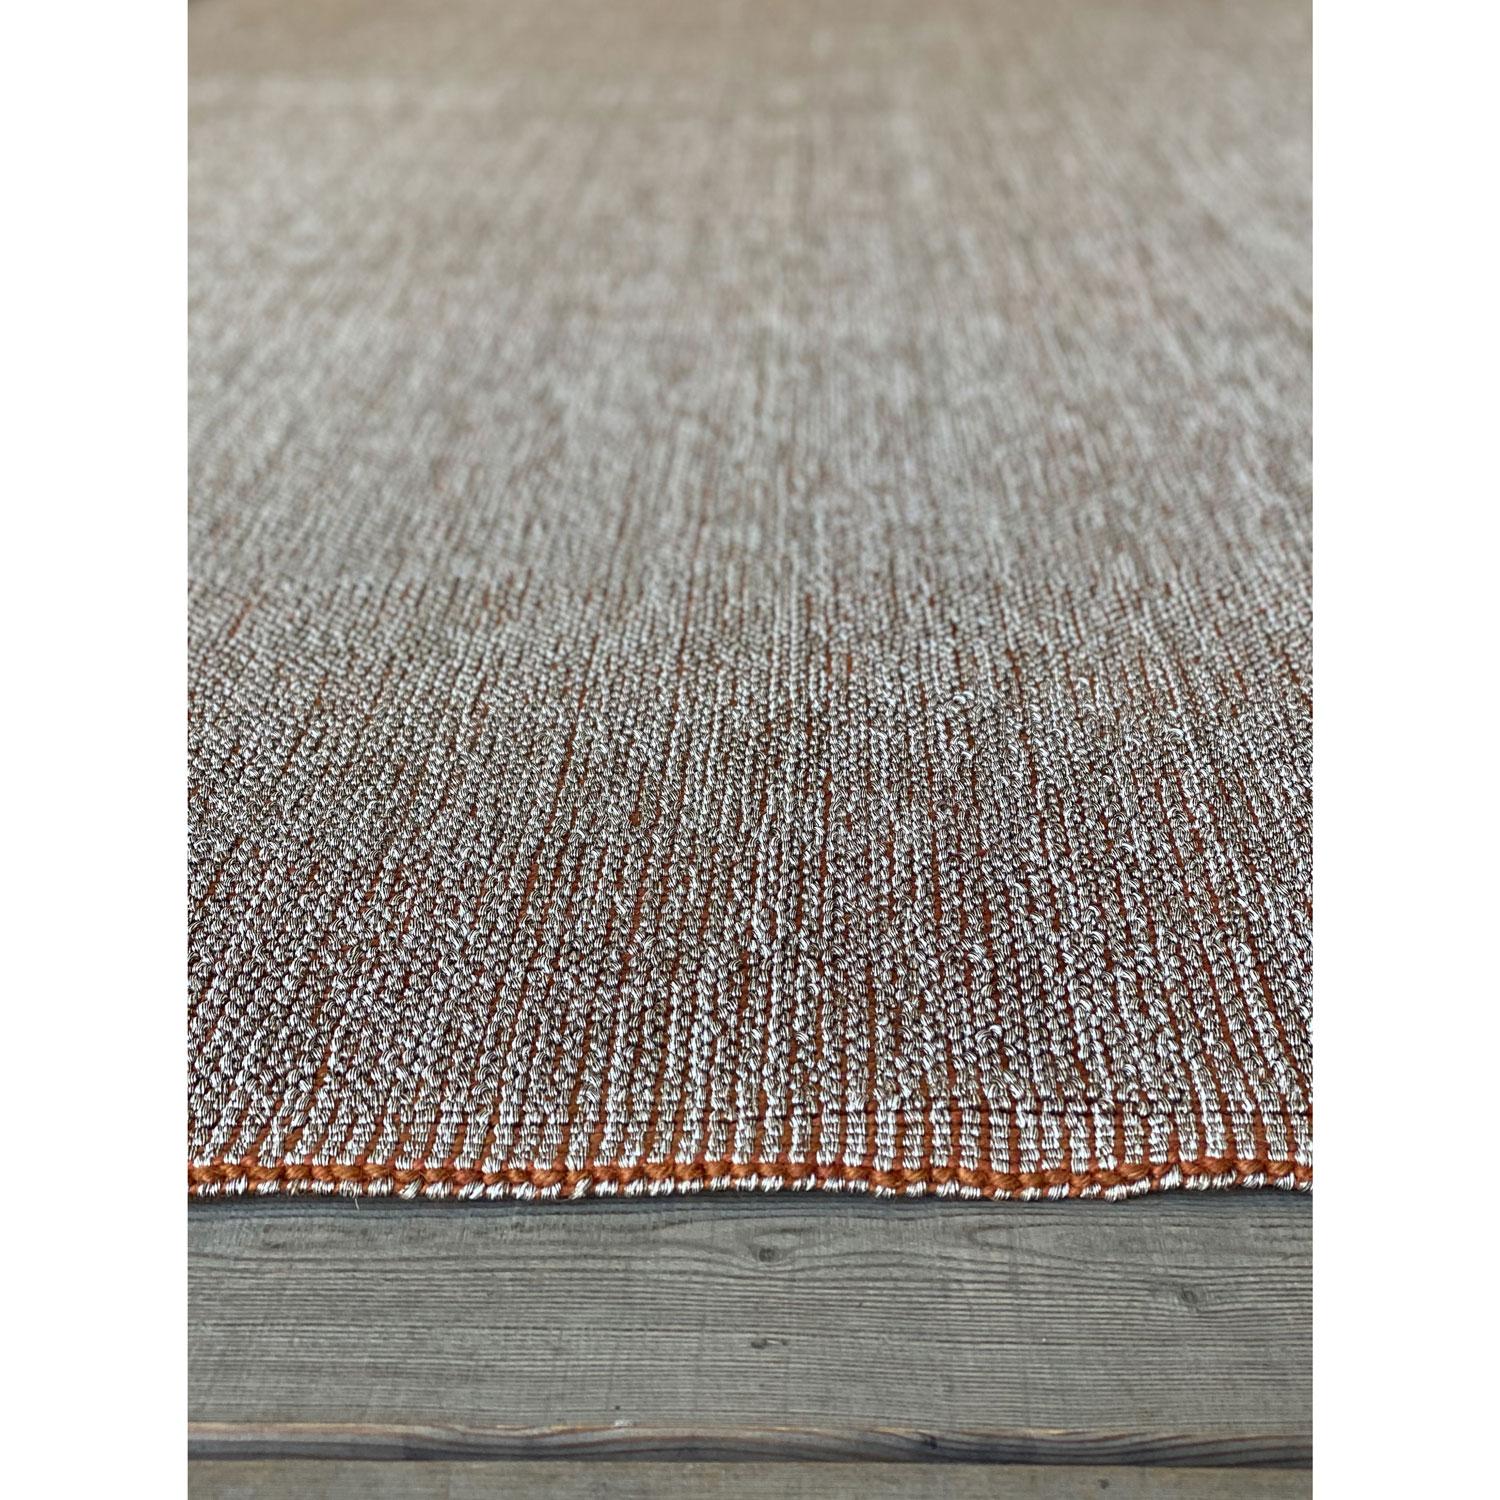 Indian 21st Cent Performing Grey Orange Design Rug by Deanna Comellini 250x350 cm For Sale